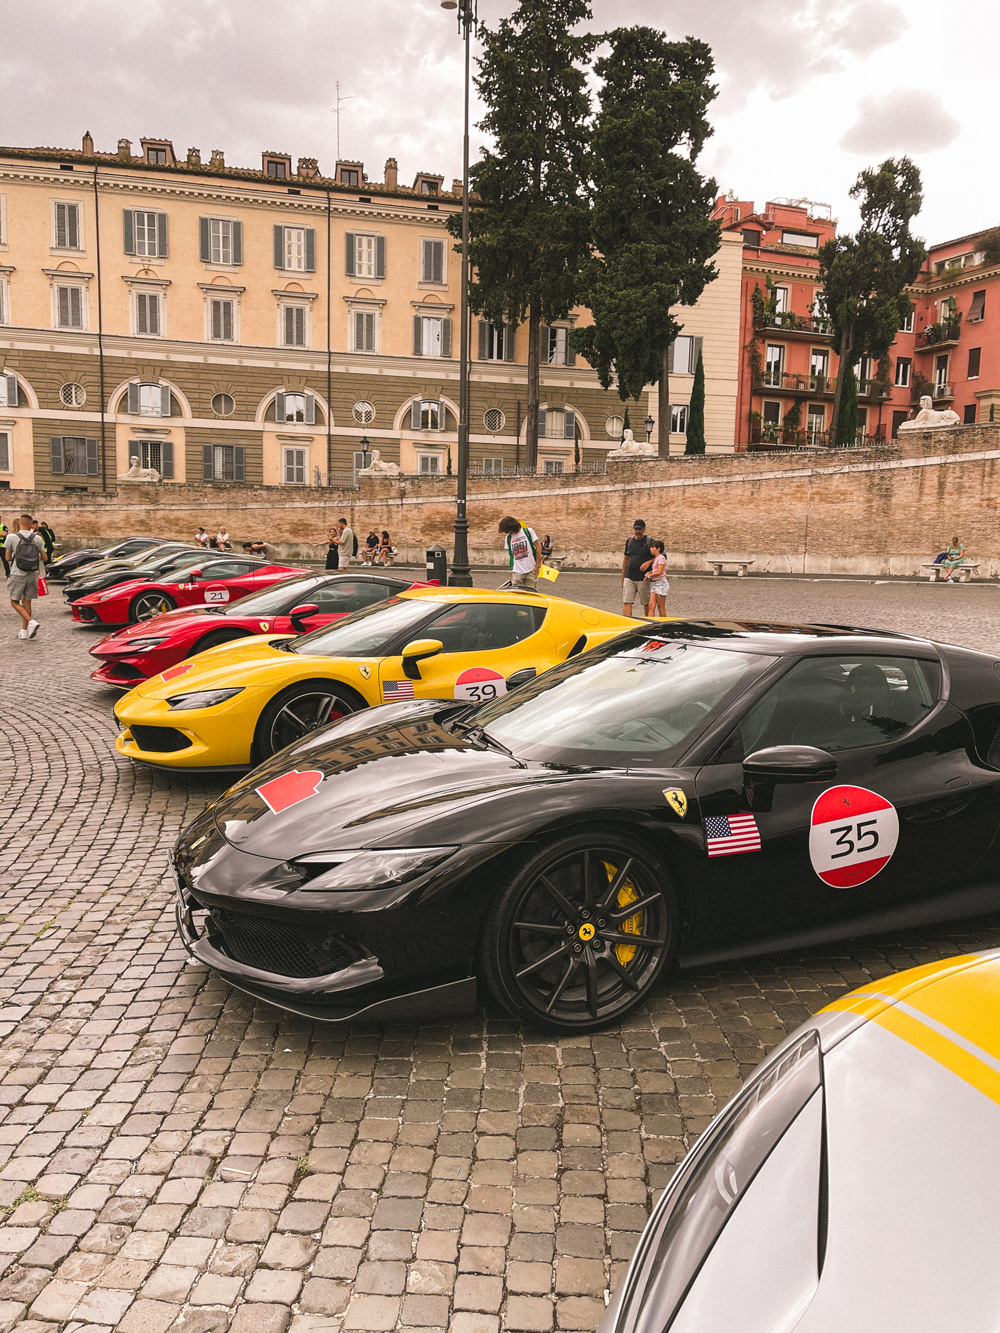 UNCONVENTIONAL ACTIVITY IN ROME | RENTING A FERRARI IN ROME